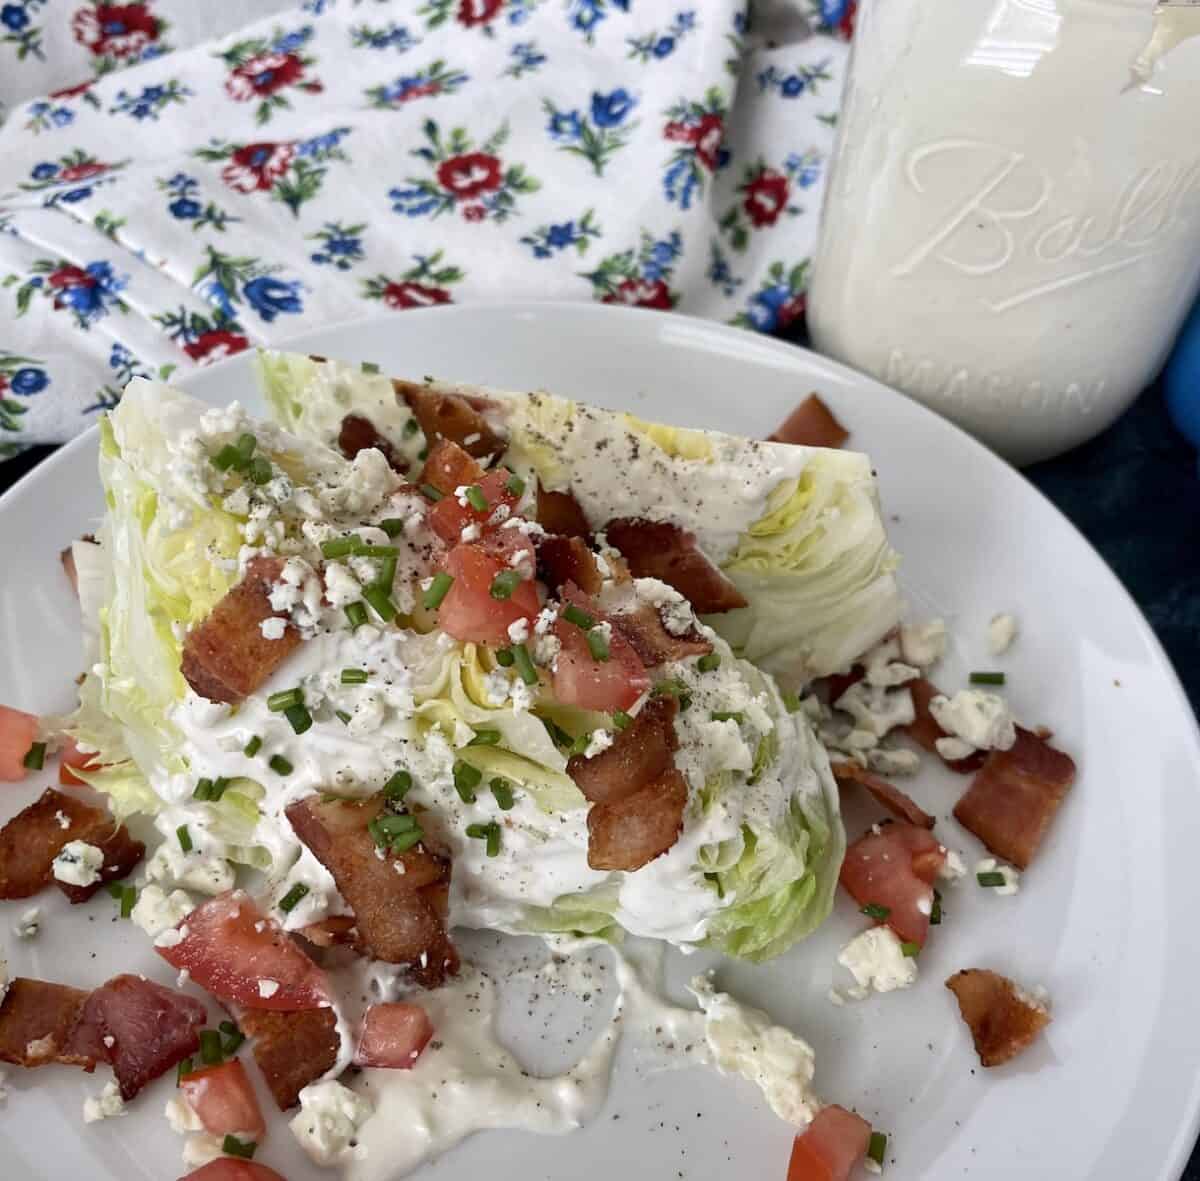 a wedge salad served on a white plate with a flower apron and jar of fresh blue cheese dressing in the background